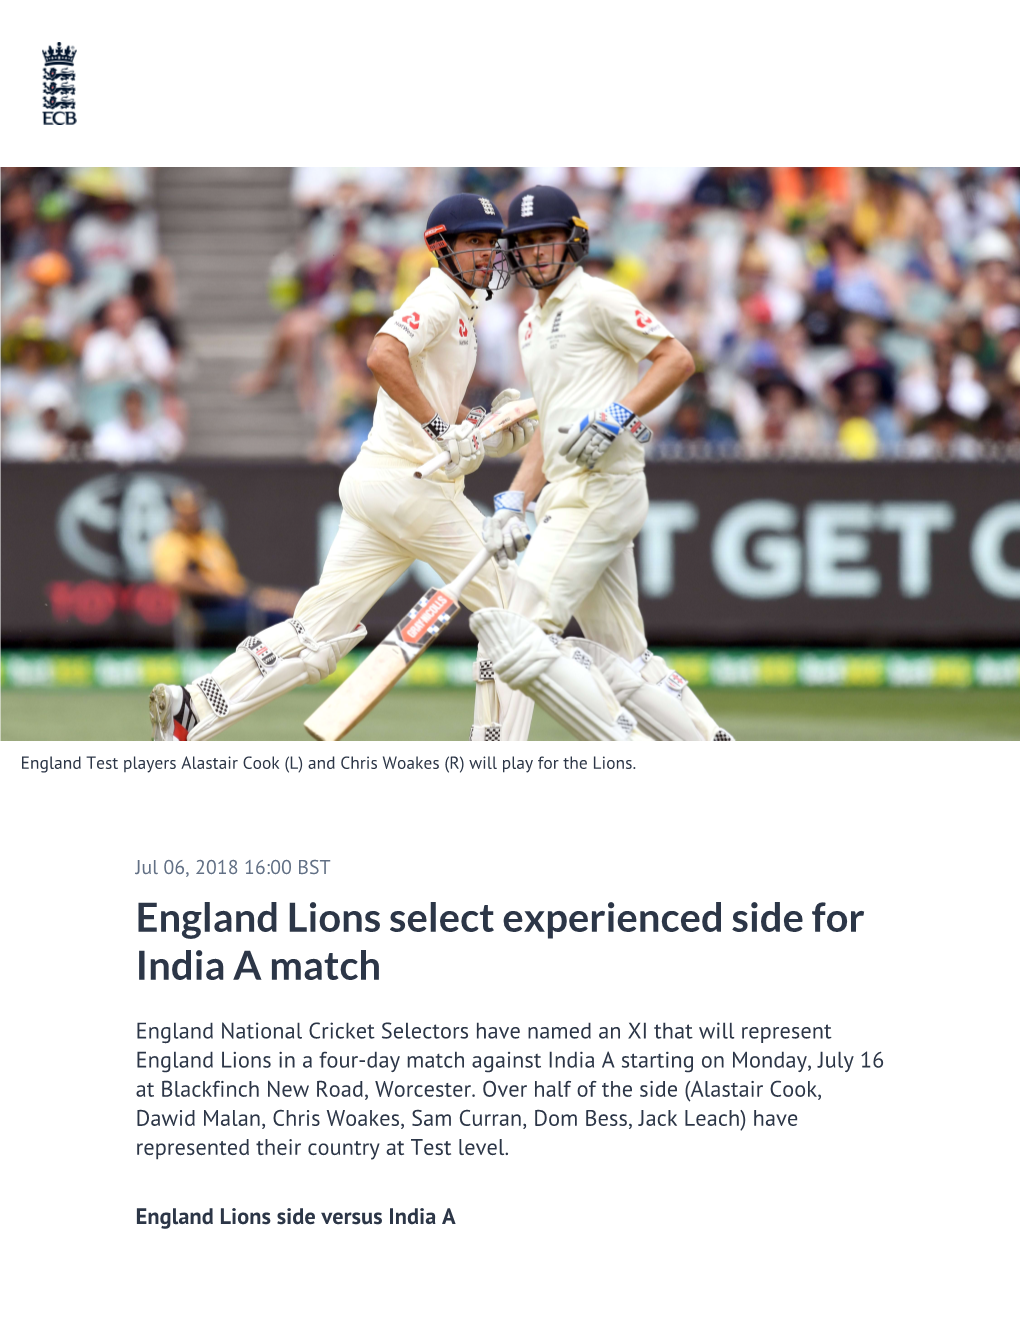 ​England Lions Select Experienced Side for India a Match